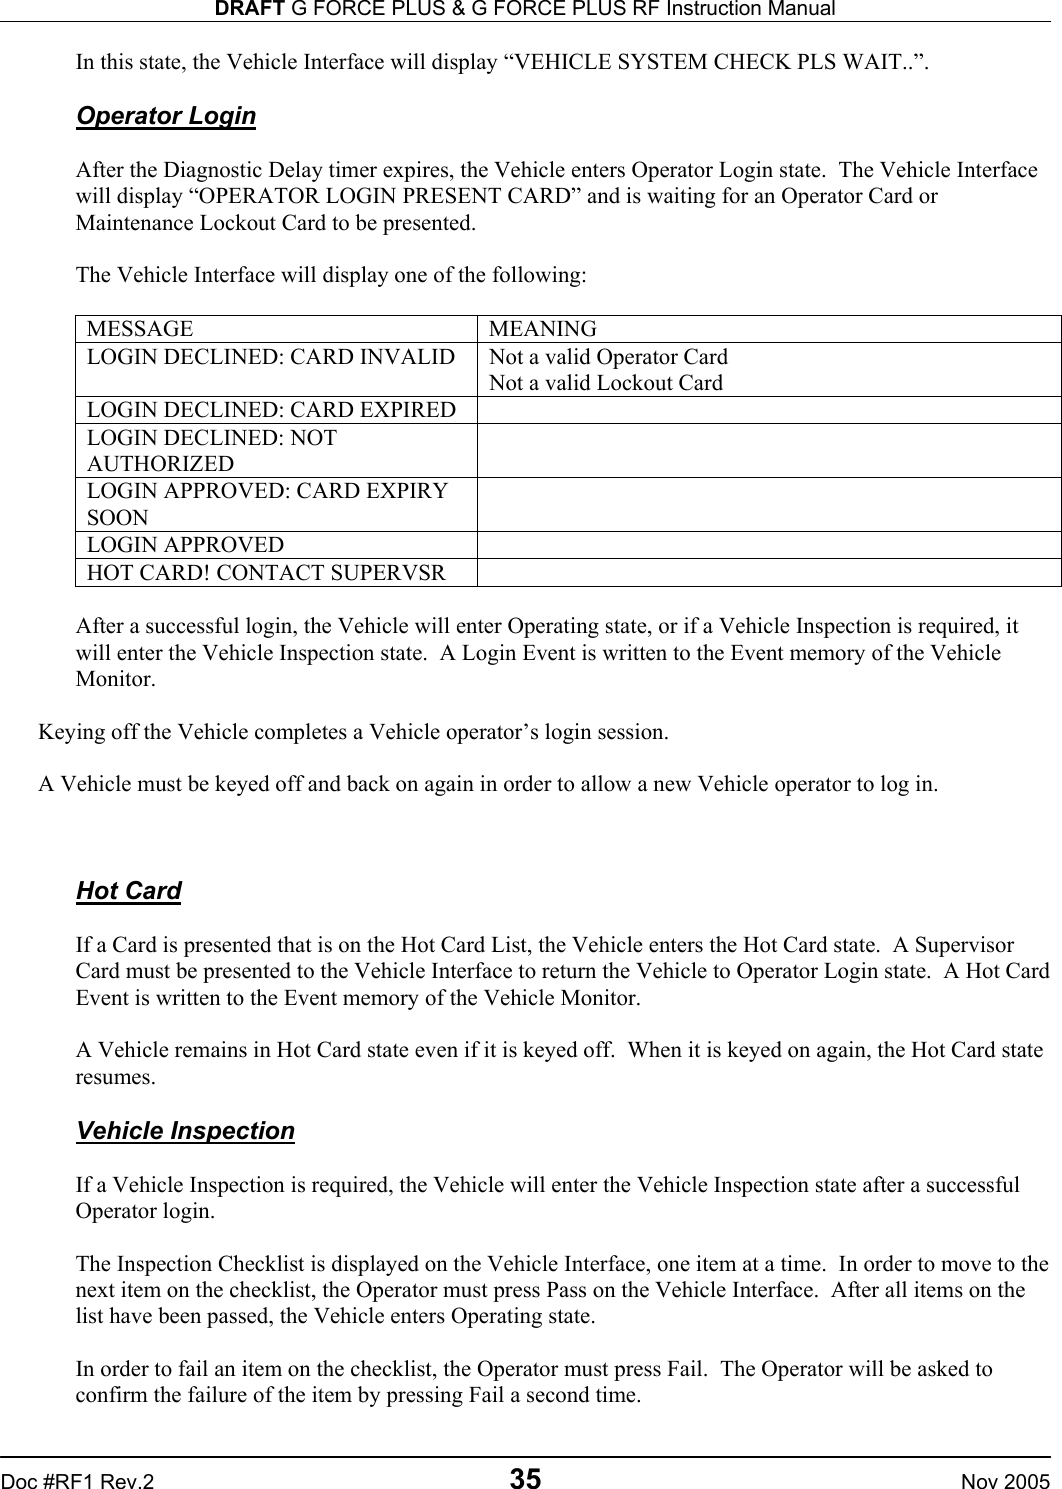 DRAFT G FORCE PLUS &amp; G FORCE PLUS RF Instruction Manual   Doc #RF1 Rev.2  35  Nov 2005 In this state, the Vehicle Interface will display “VEHICLE SYSTEM CHECK PLS WAIT..”.   Operator Login  After the Diagnostic Delay timer expires, the Vehicle enters Operator Login state.  The Vehicle Interface will display “OPERATOR LOGIN PRESENT CARD” and is waiting for an Operator Card or Maintenance Lockout Card to be presented.   The Vehicle Interface will display one of the following:  MESSAGE MEANING LOGIN DECLINED: CARD INVALID  Not a valid Operator Card Not a valid Lockout Card LOGIN DECLINED: CARD EXPIRED   LOGIN DECLINED: NOT AUTHORIZED  LOGIN APPROVED: CARD EXPIRY SOON  LOGIN APPROVED   HOT CARD! CONTACT SUPERVSR    After a successful login, the Vehicle will enter Operating state, or if a Vehicle Inspection is required, it will enter the Vehicle Inspection state.  A Login Event is written to the Event memory of the Vehicle Monitor.    Keying off the Vehicle completes a Vehicle operator’s login session.  A Vehicle must be keyed off and back on again in order to allow a new Vehicle operator to log in.    Hot Card  If a Card is presented that is on the Hot Card List, the Vehicle enters the Hot Card state.  A Supervisor Card must be presented to the Vehicle Interface to return the Vehicle to Operator Login state.  A Hot Card Event is written to the Event memory of the Vehicle Monitor.  A Vehicle remains in Hot Card state even if it is keyed off.  When it is keyed on again, the Hot Card state resumes.  Vehicle Inspection  If a Vehicle Inspection is required, the Vehicle will enter the Vehicle Inspection state after a successful Operator login.  The Inspection Checklist is displayed on the Vehicle Interface, one item at a time.  In order to move to the next item on the checklist, the Operator must press Pass on the Vehicle Interface.  After all items on the list have been passed, the Vehicle enters Operating state.  In order to fail an item on the checklist, the Operator must press Fail.  The Operator will be asked to confirm the failure of the item by pressing Fail a second time.  